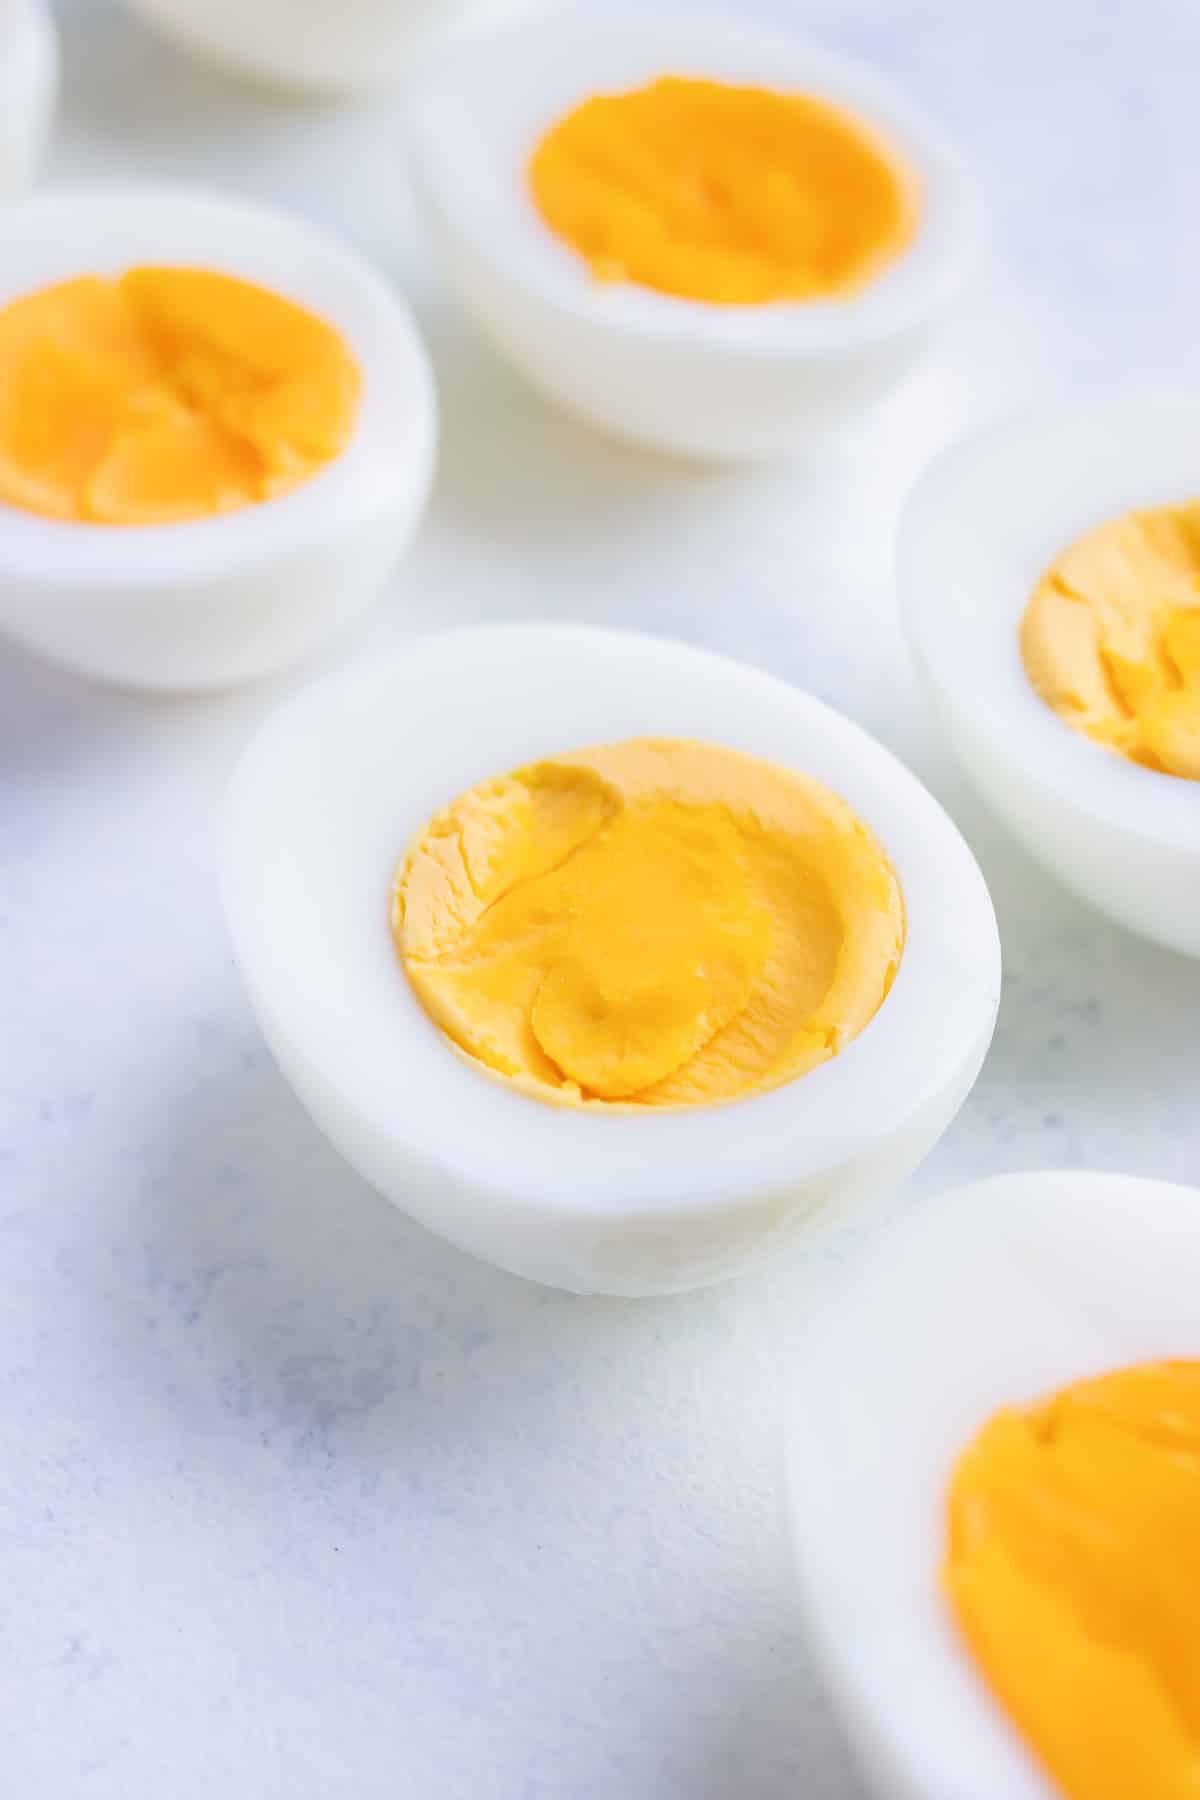 The best, peeled soft-boiled and hard-boiled eggs are placed on the counter.